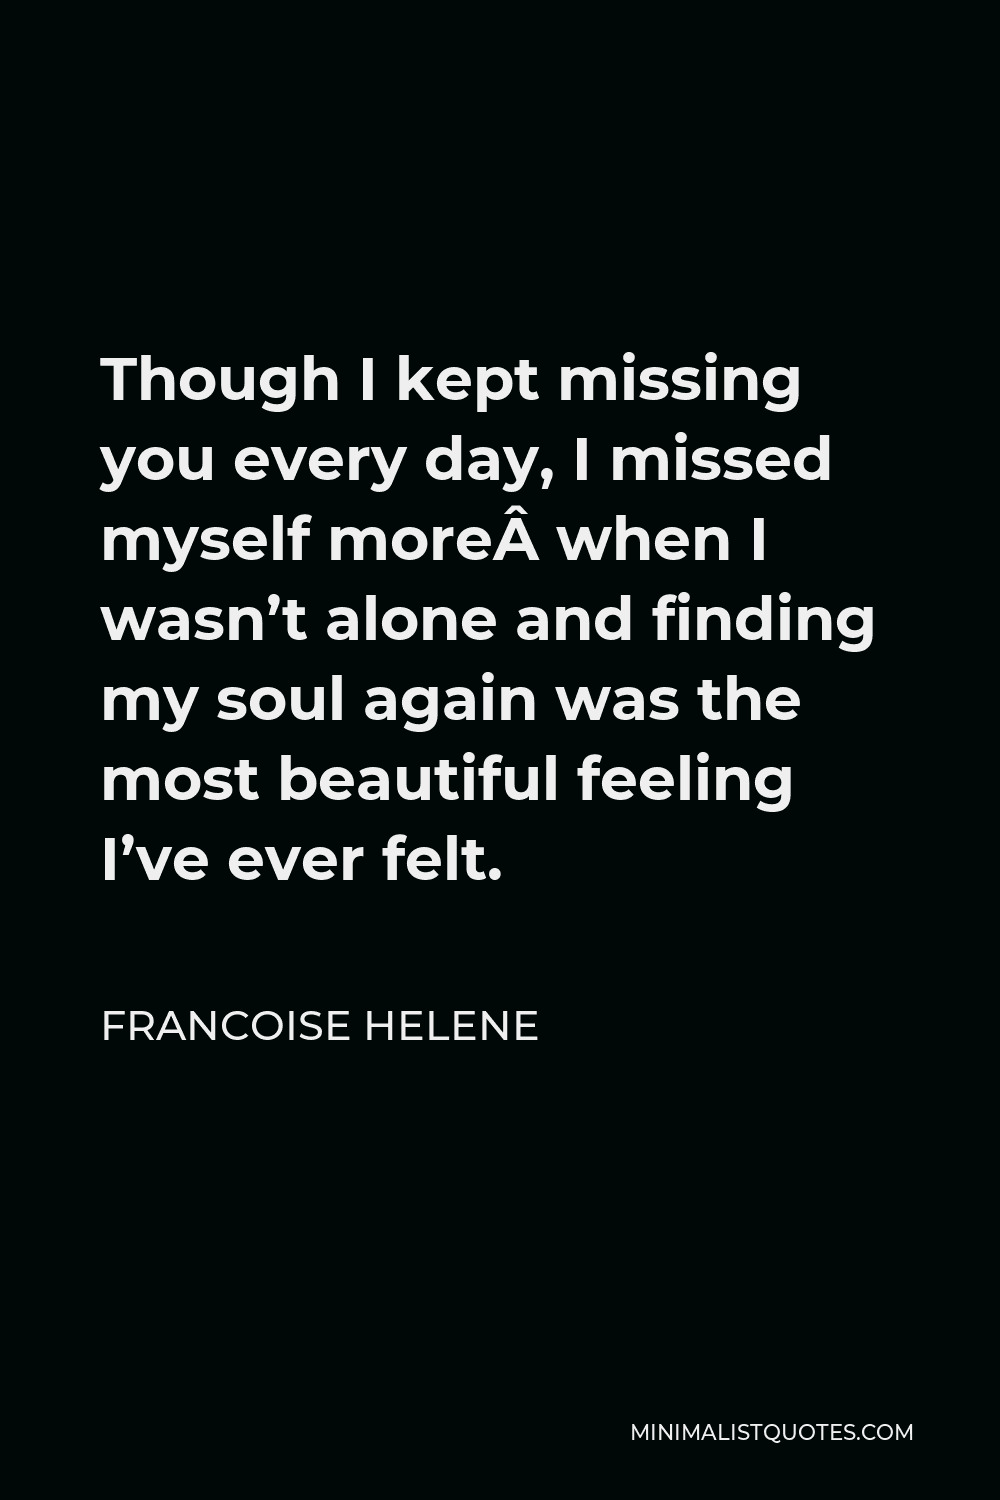 Francoise Helene Quote - Though I kept missing you every day, I missed myself more when I wasn’t alone and finding my soul again was the most beautiful feeling I’ve ever felt.